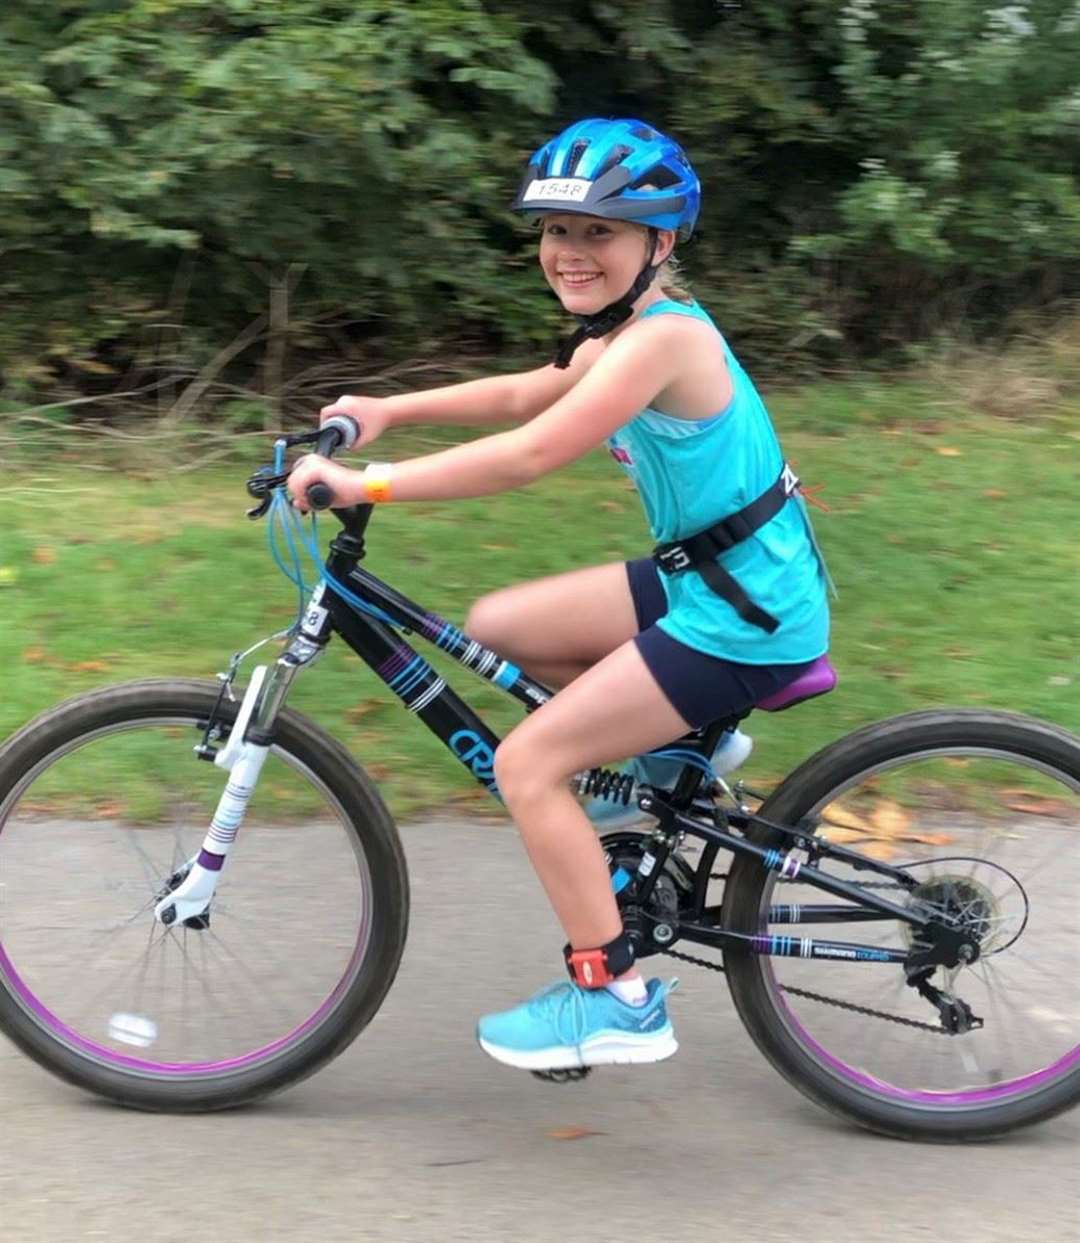 Mother of 10-year-old Olivia Phillips says despite her daughter being sick after the triathlon at Hever Castle she “has not been put off” by the event. Picture: Emma Phillips